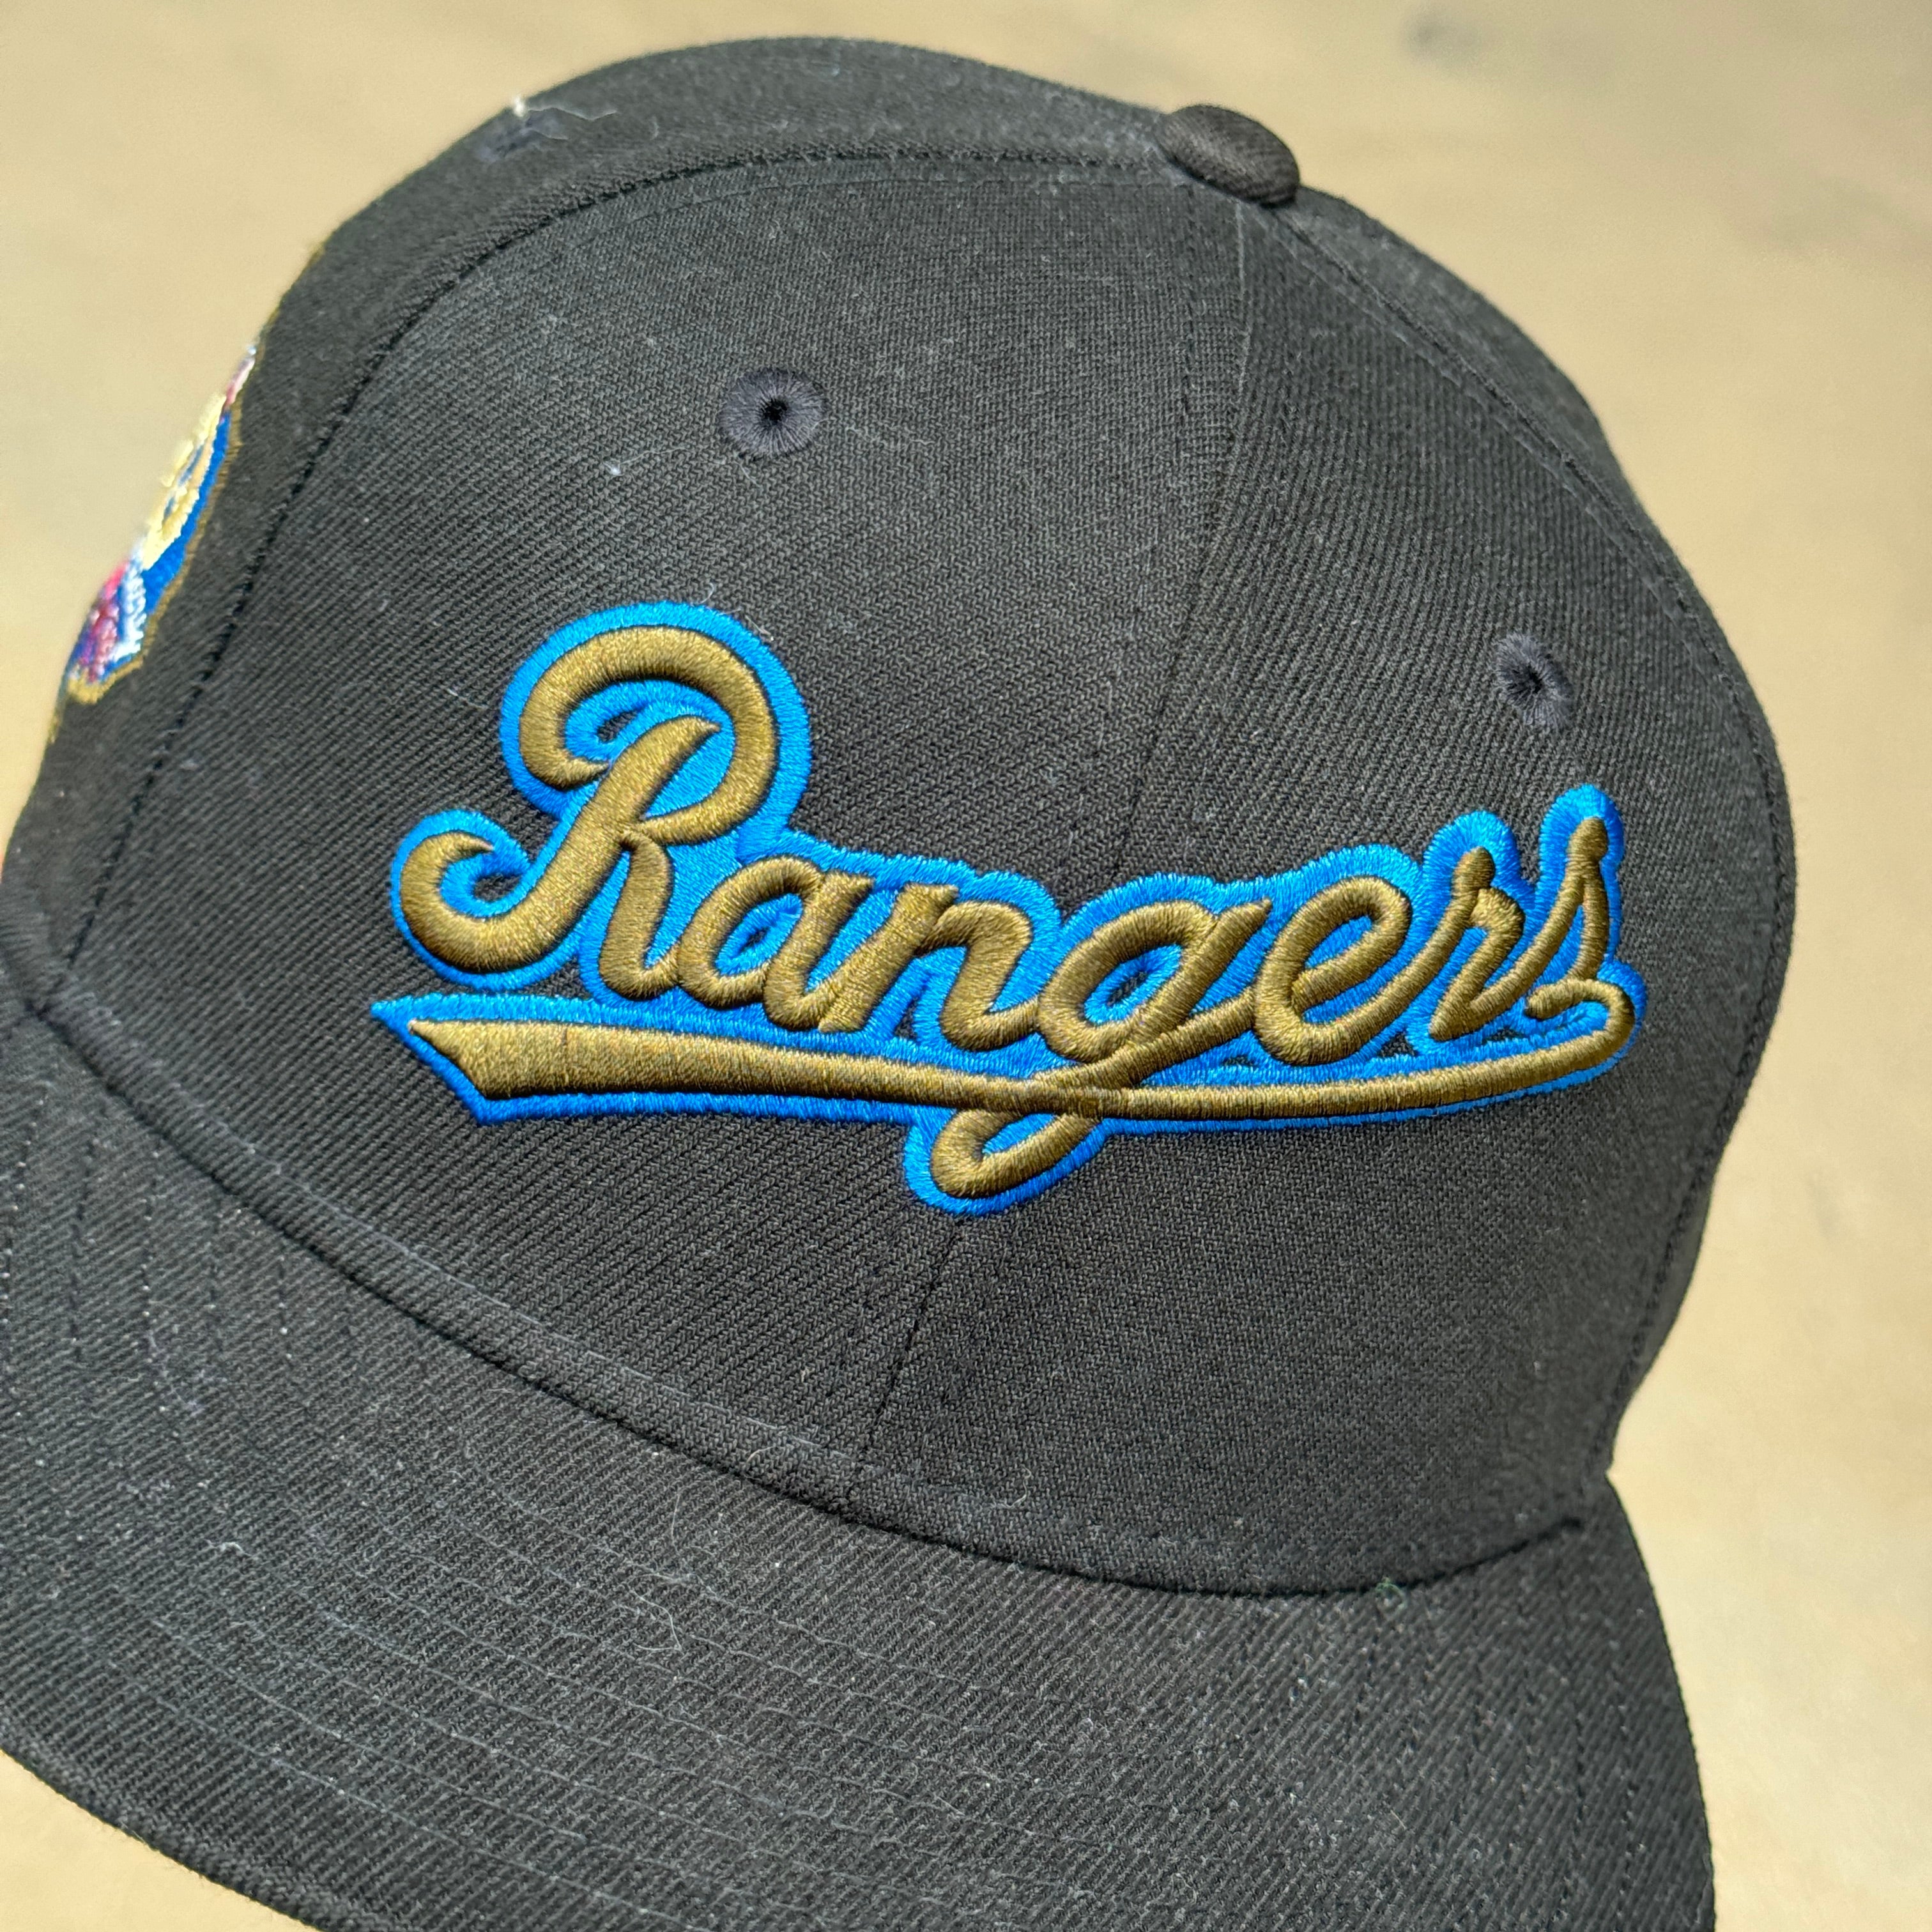 USED 1/8 Black Dallas Texas Rangers 40th Anniversary 59fifty New Era Fitted Hat Cap